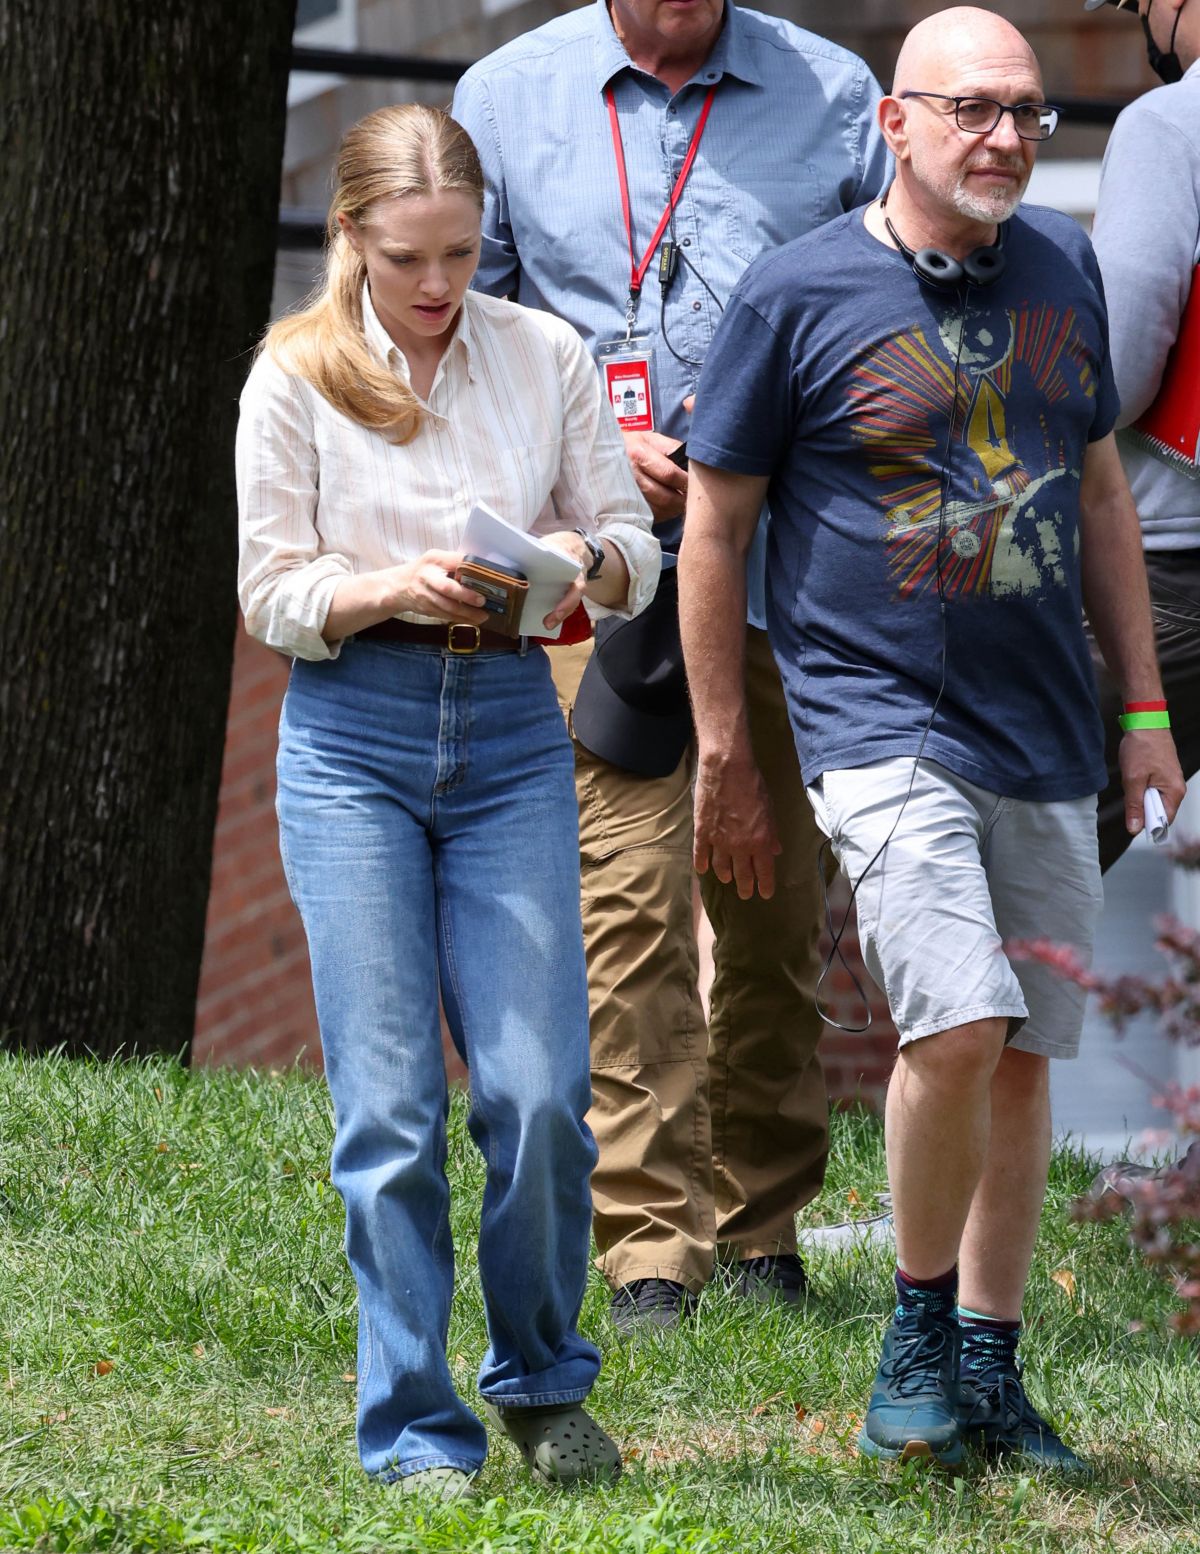 Amanda Seyfried On The Set Of The Crowded Room In New York 07 26 2022 1 